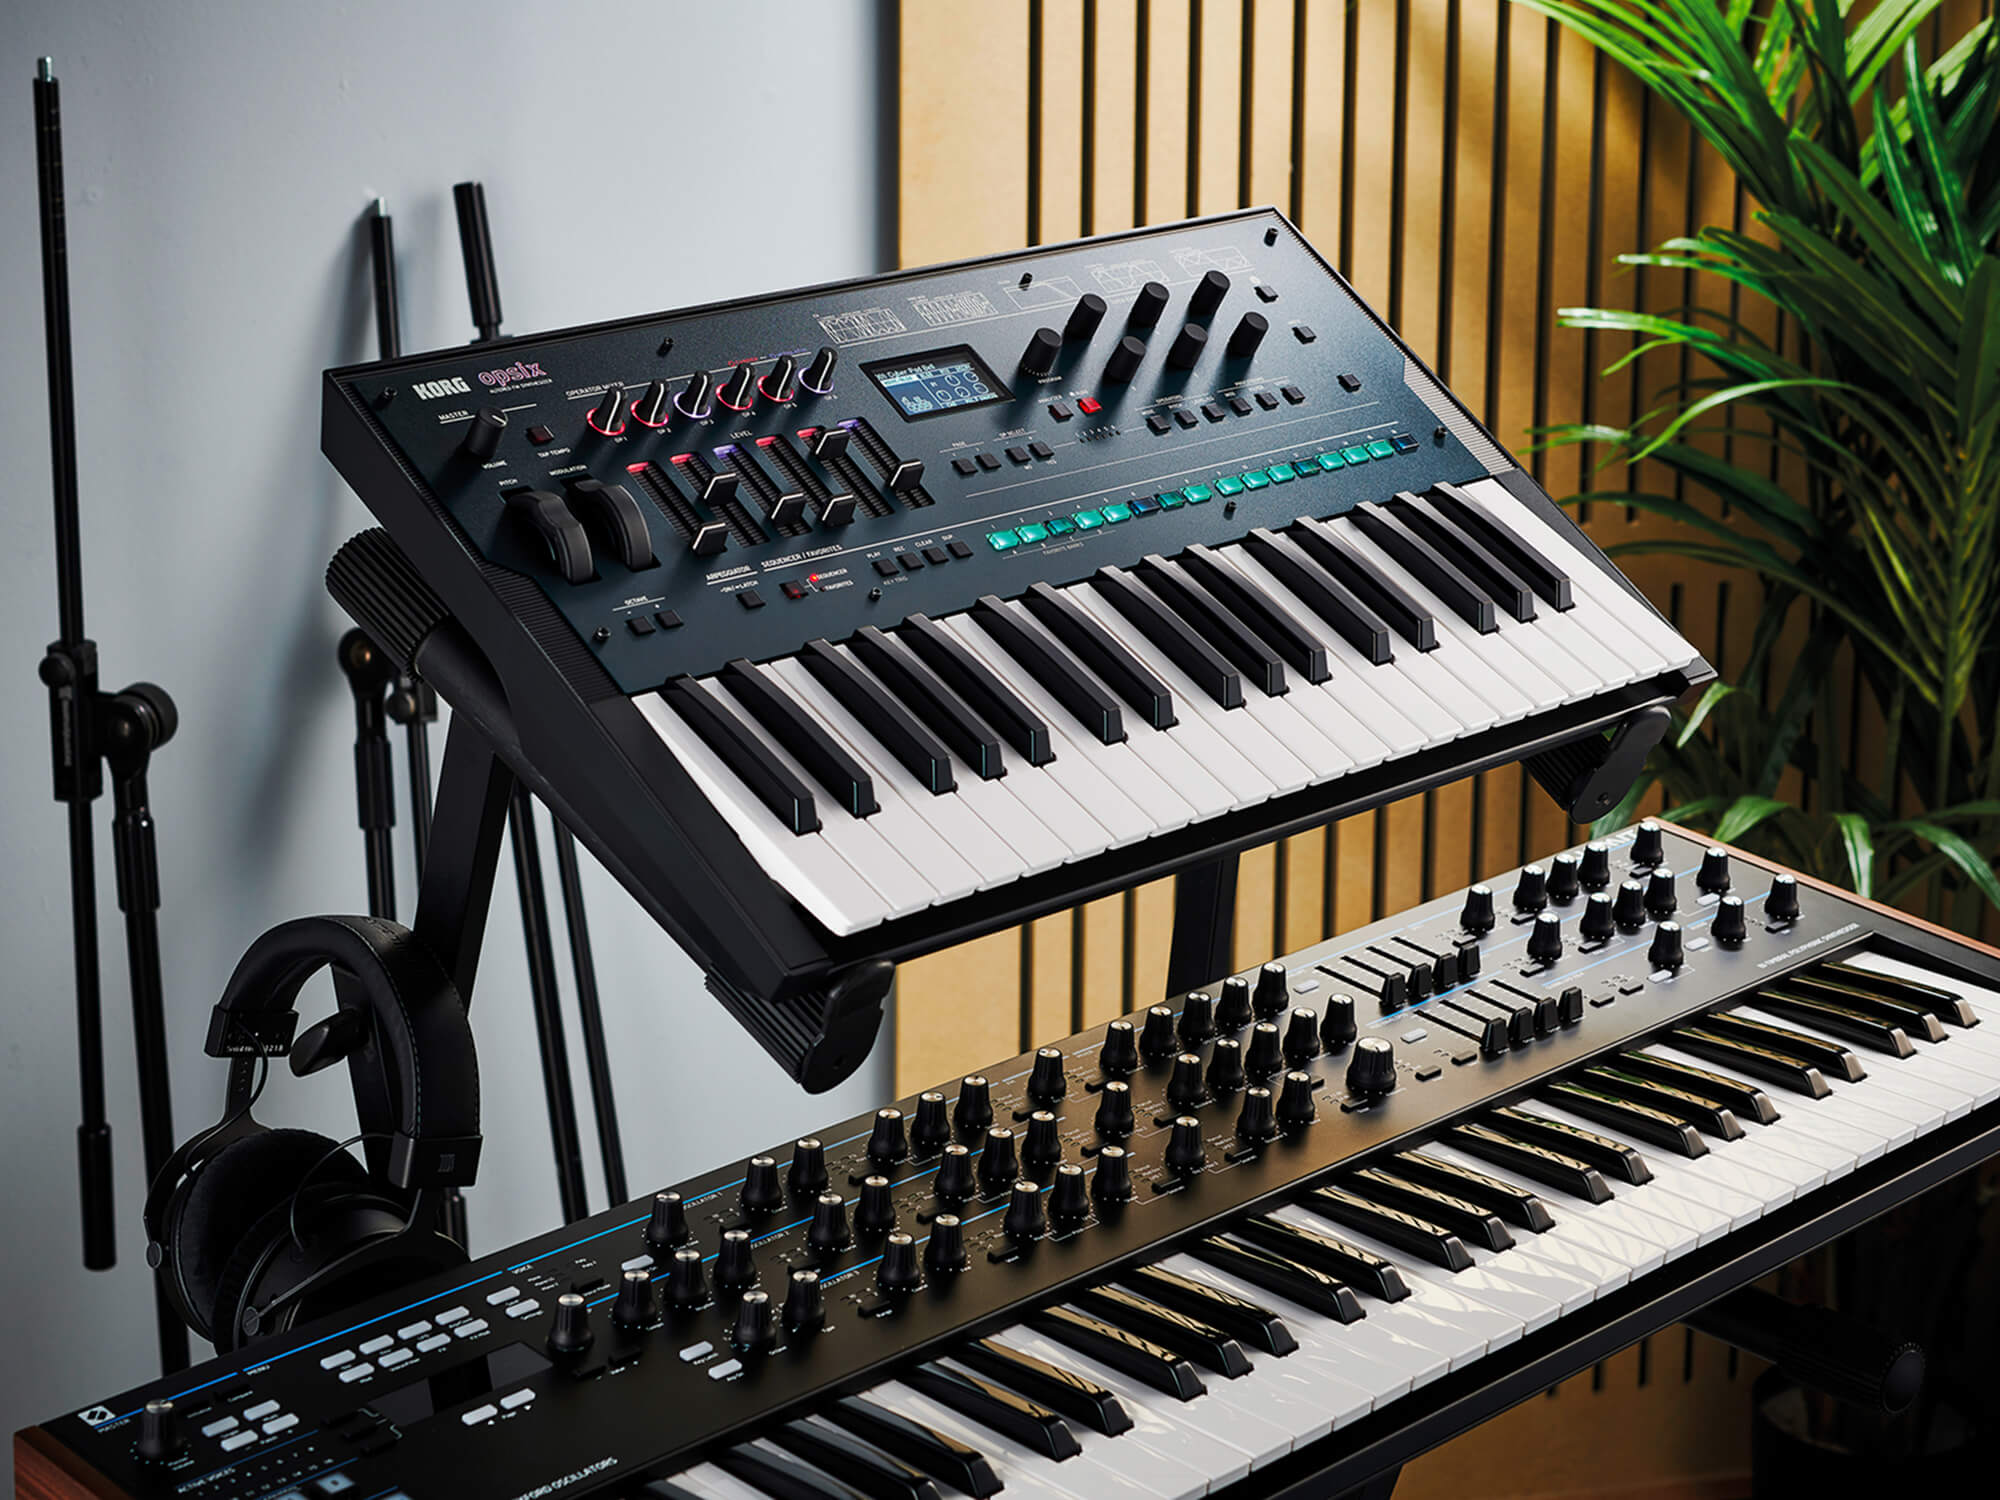 Korg Opsix synthesizer, photo by Olly Curtis/Future Publishing via Getty Images